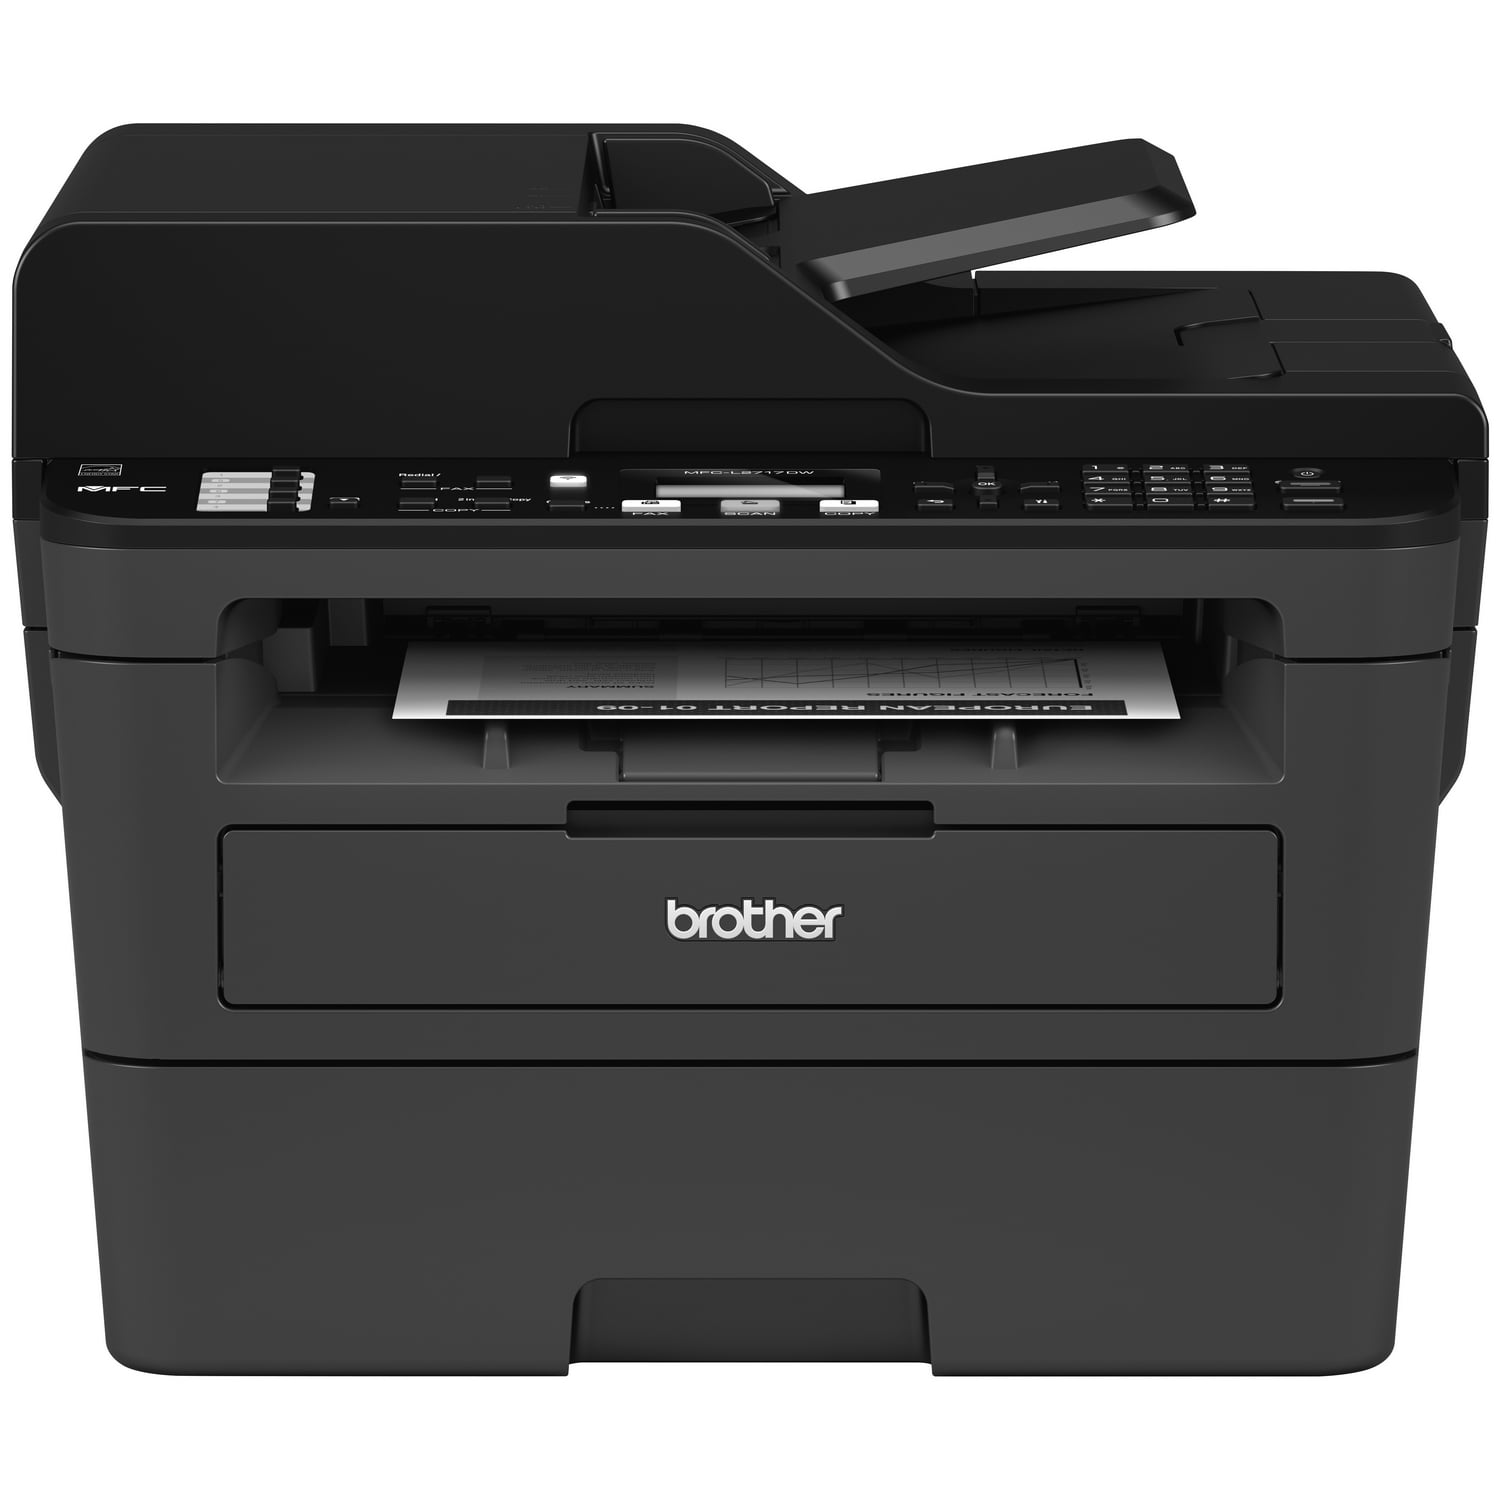 Brother MFC-L2717DW Monochrome Laser All-in-One Wireless Printer (Refurbished) $109.99 + Free Shipping